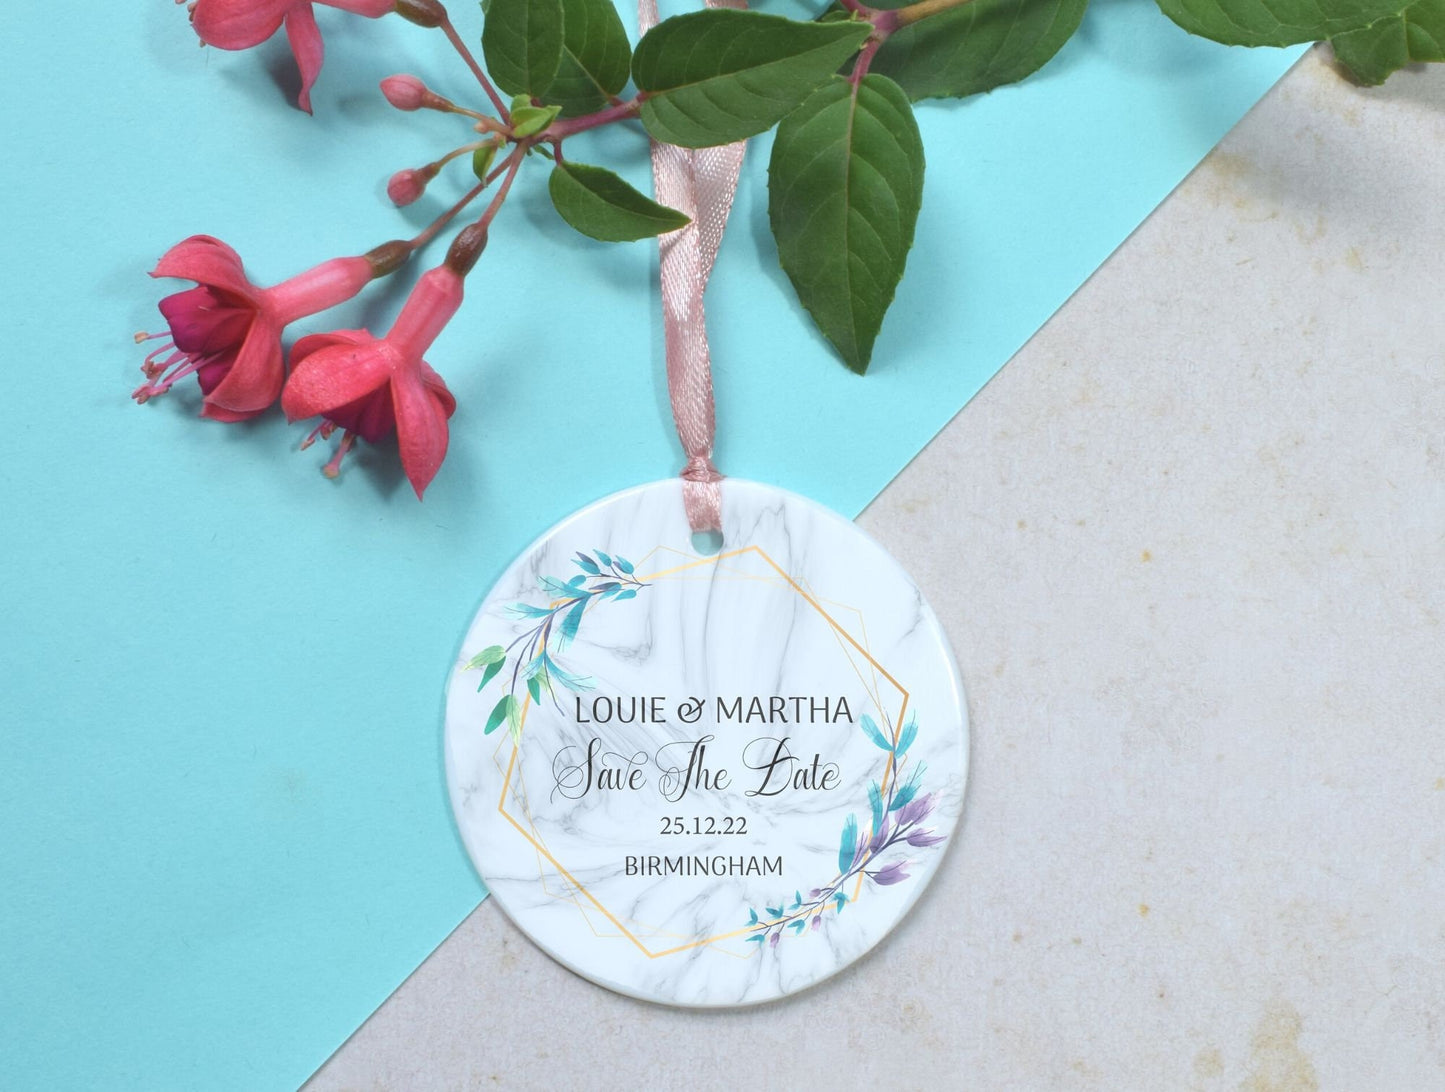 Save The Date Ornament For For Soon To Be Mr And Mrs Wedding Invitation, Engaged Ornament, Personalised Engagement Ornaments For Couples